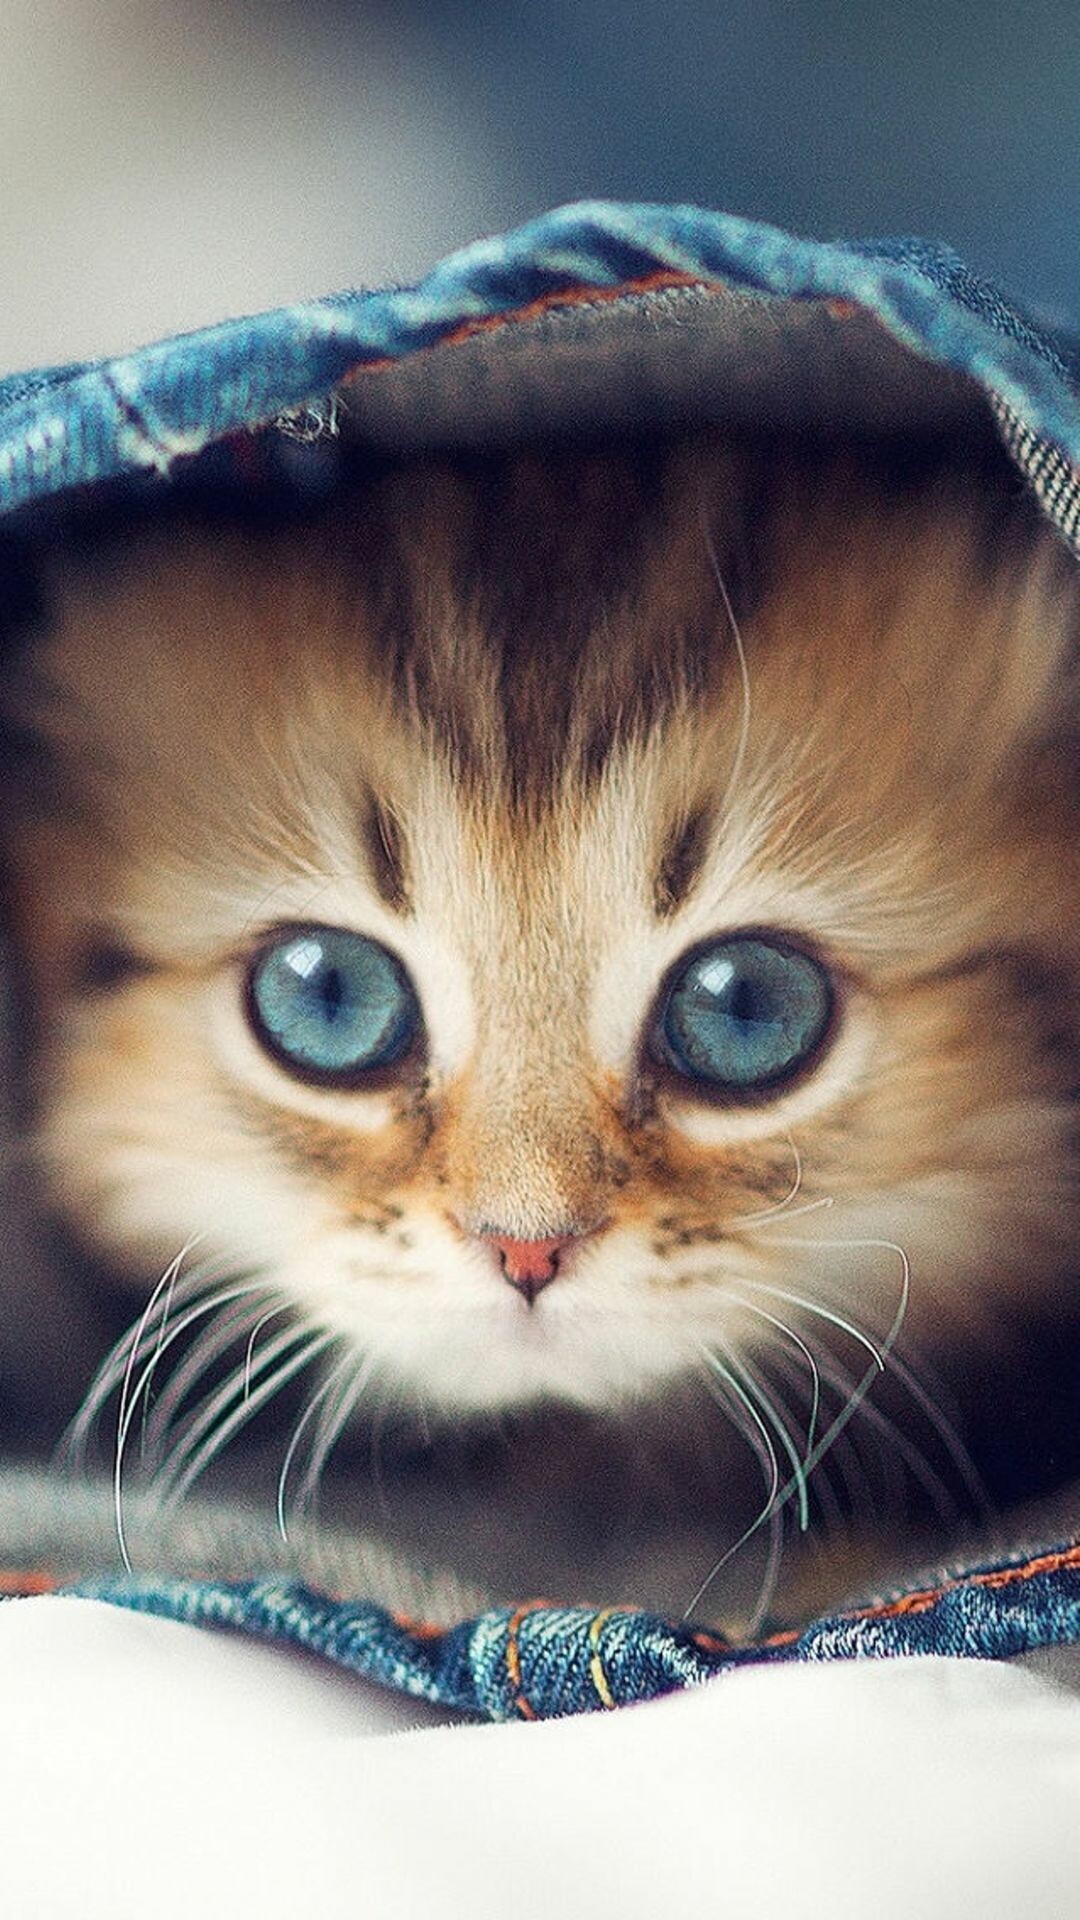 Cutest cat iPhone backgrounds, Adorable cat wallpapers, Lovely feline poses, Playful cat snapshots, 1080x1920 Full HD Phone